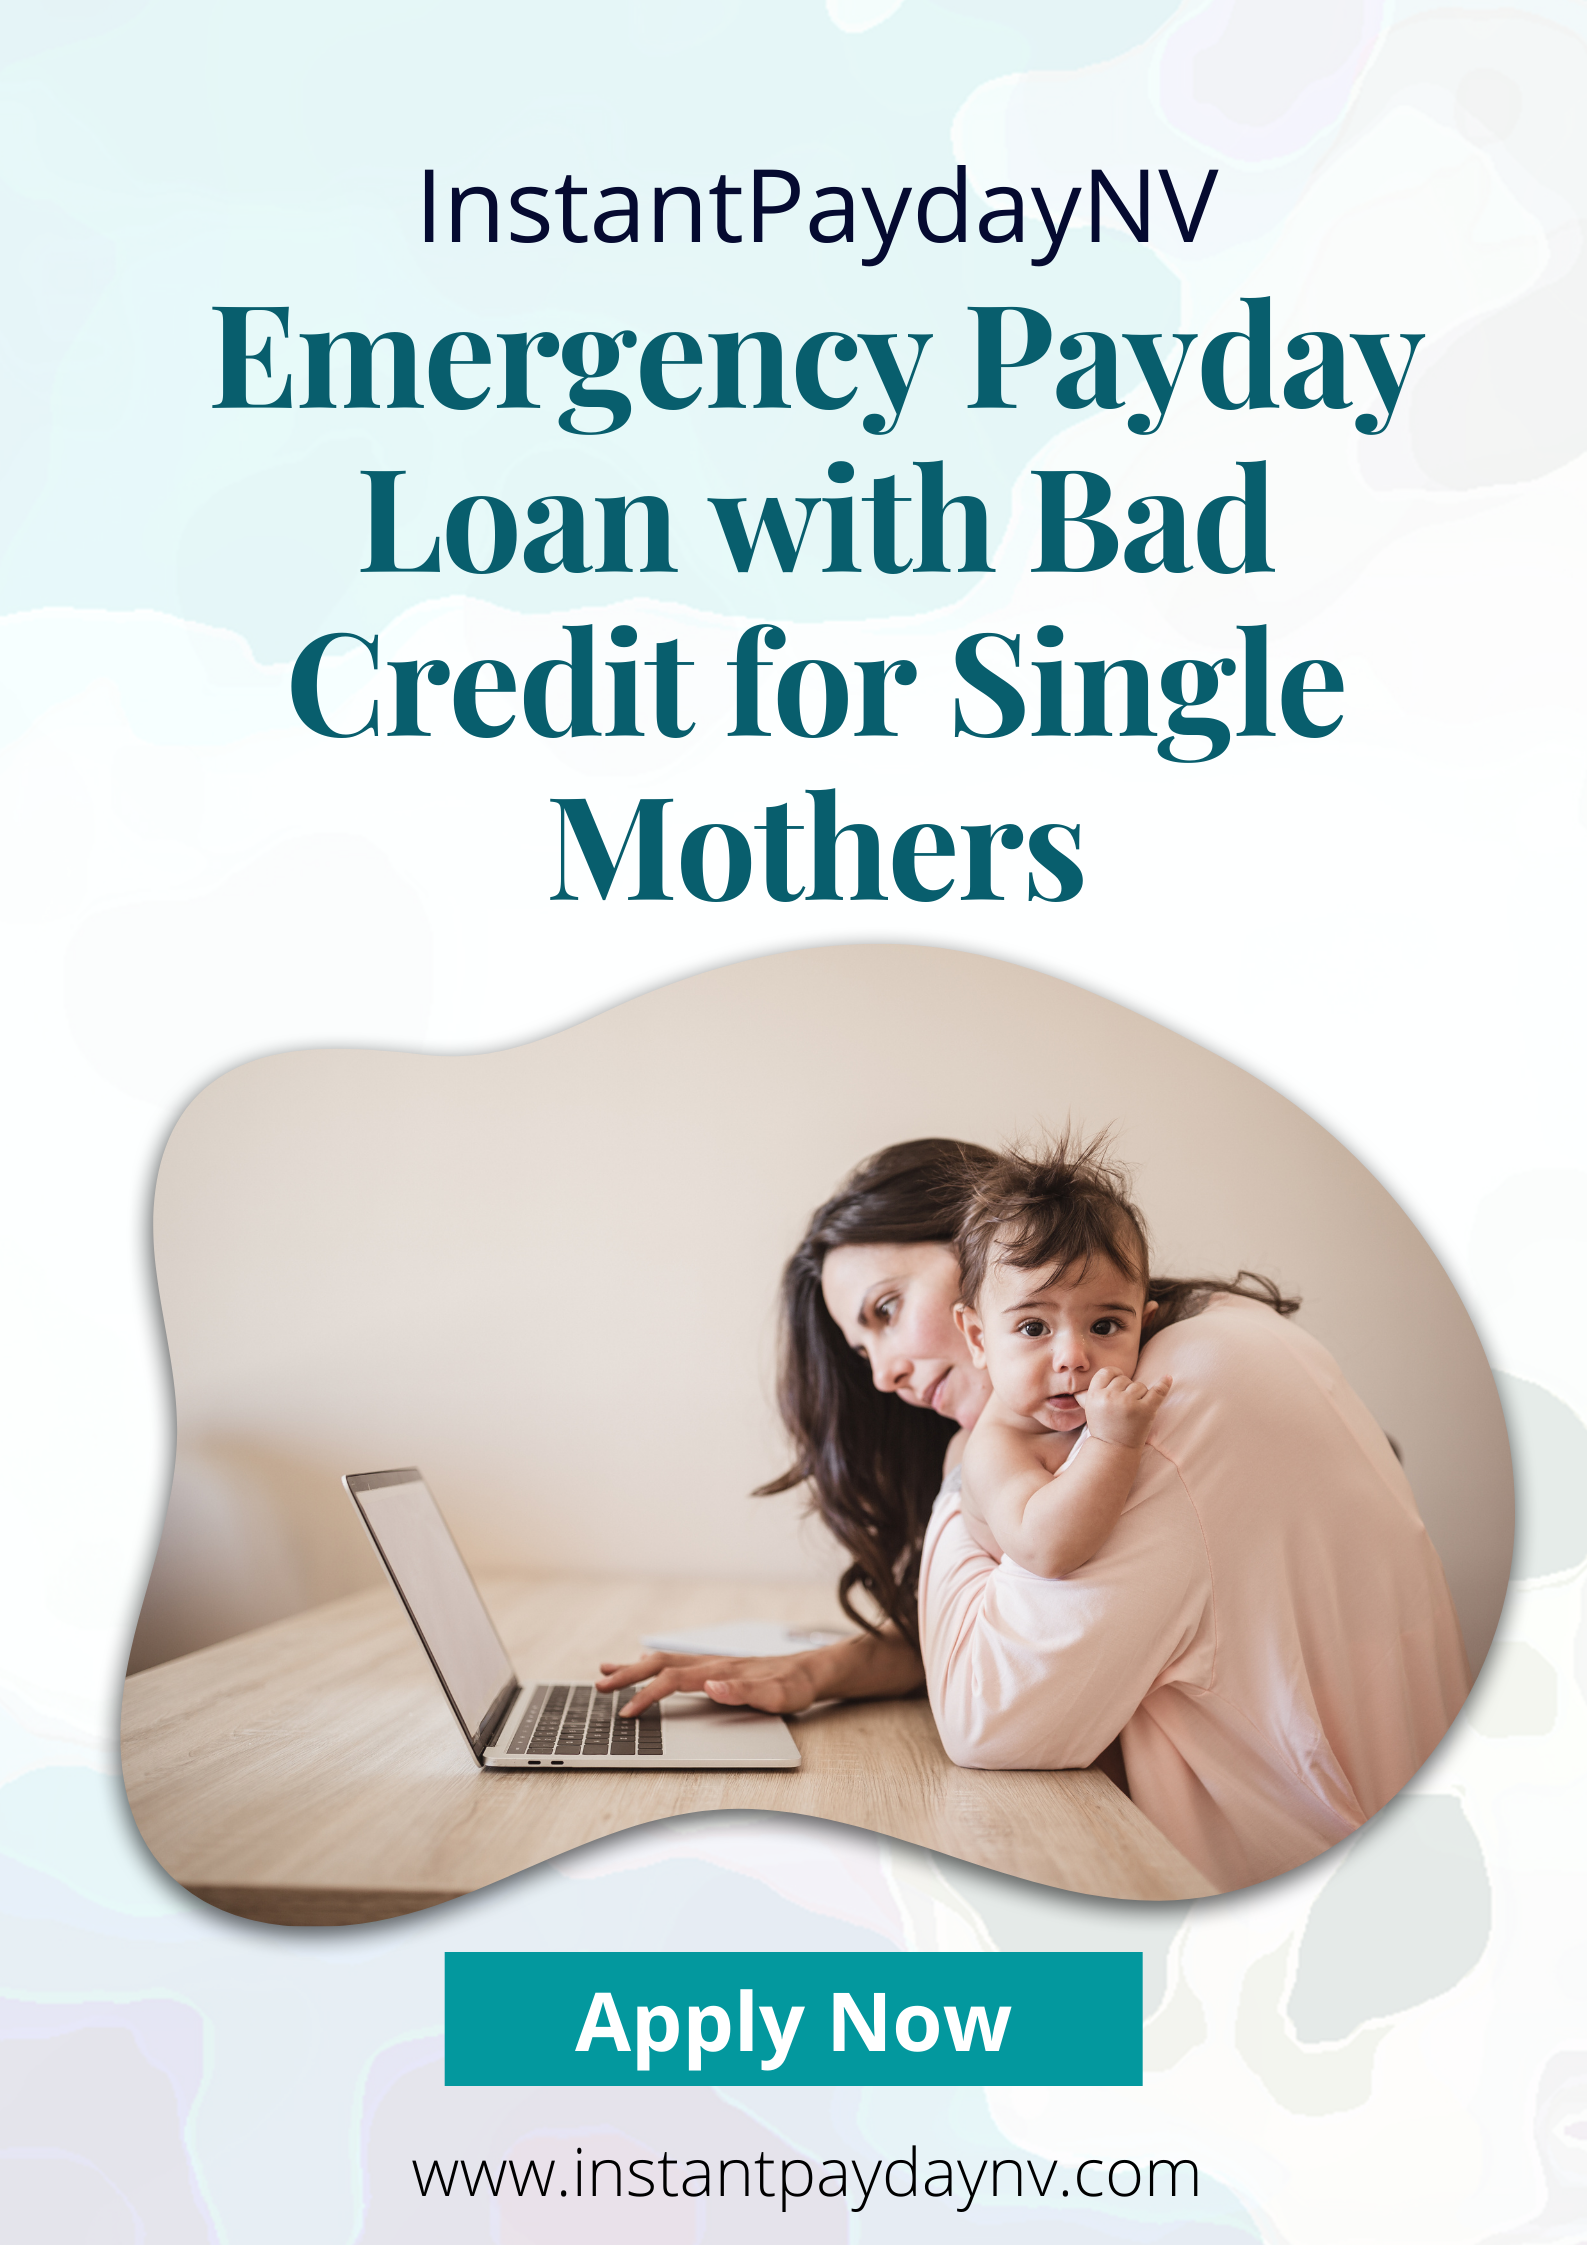 Emergency Payday Loan with Bad Credit for Single Mothers